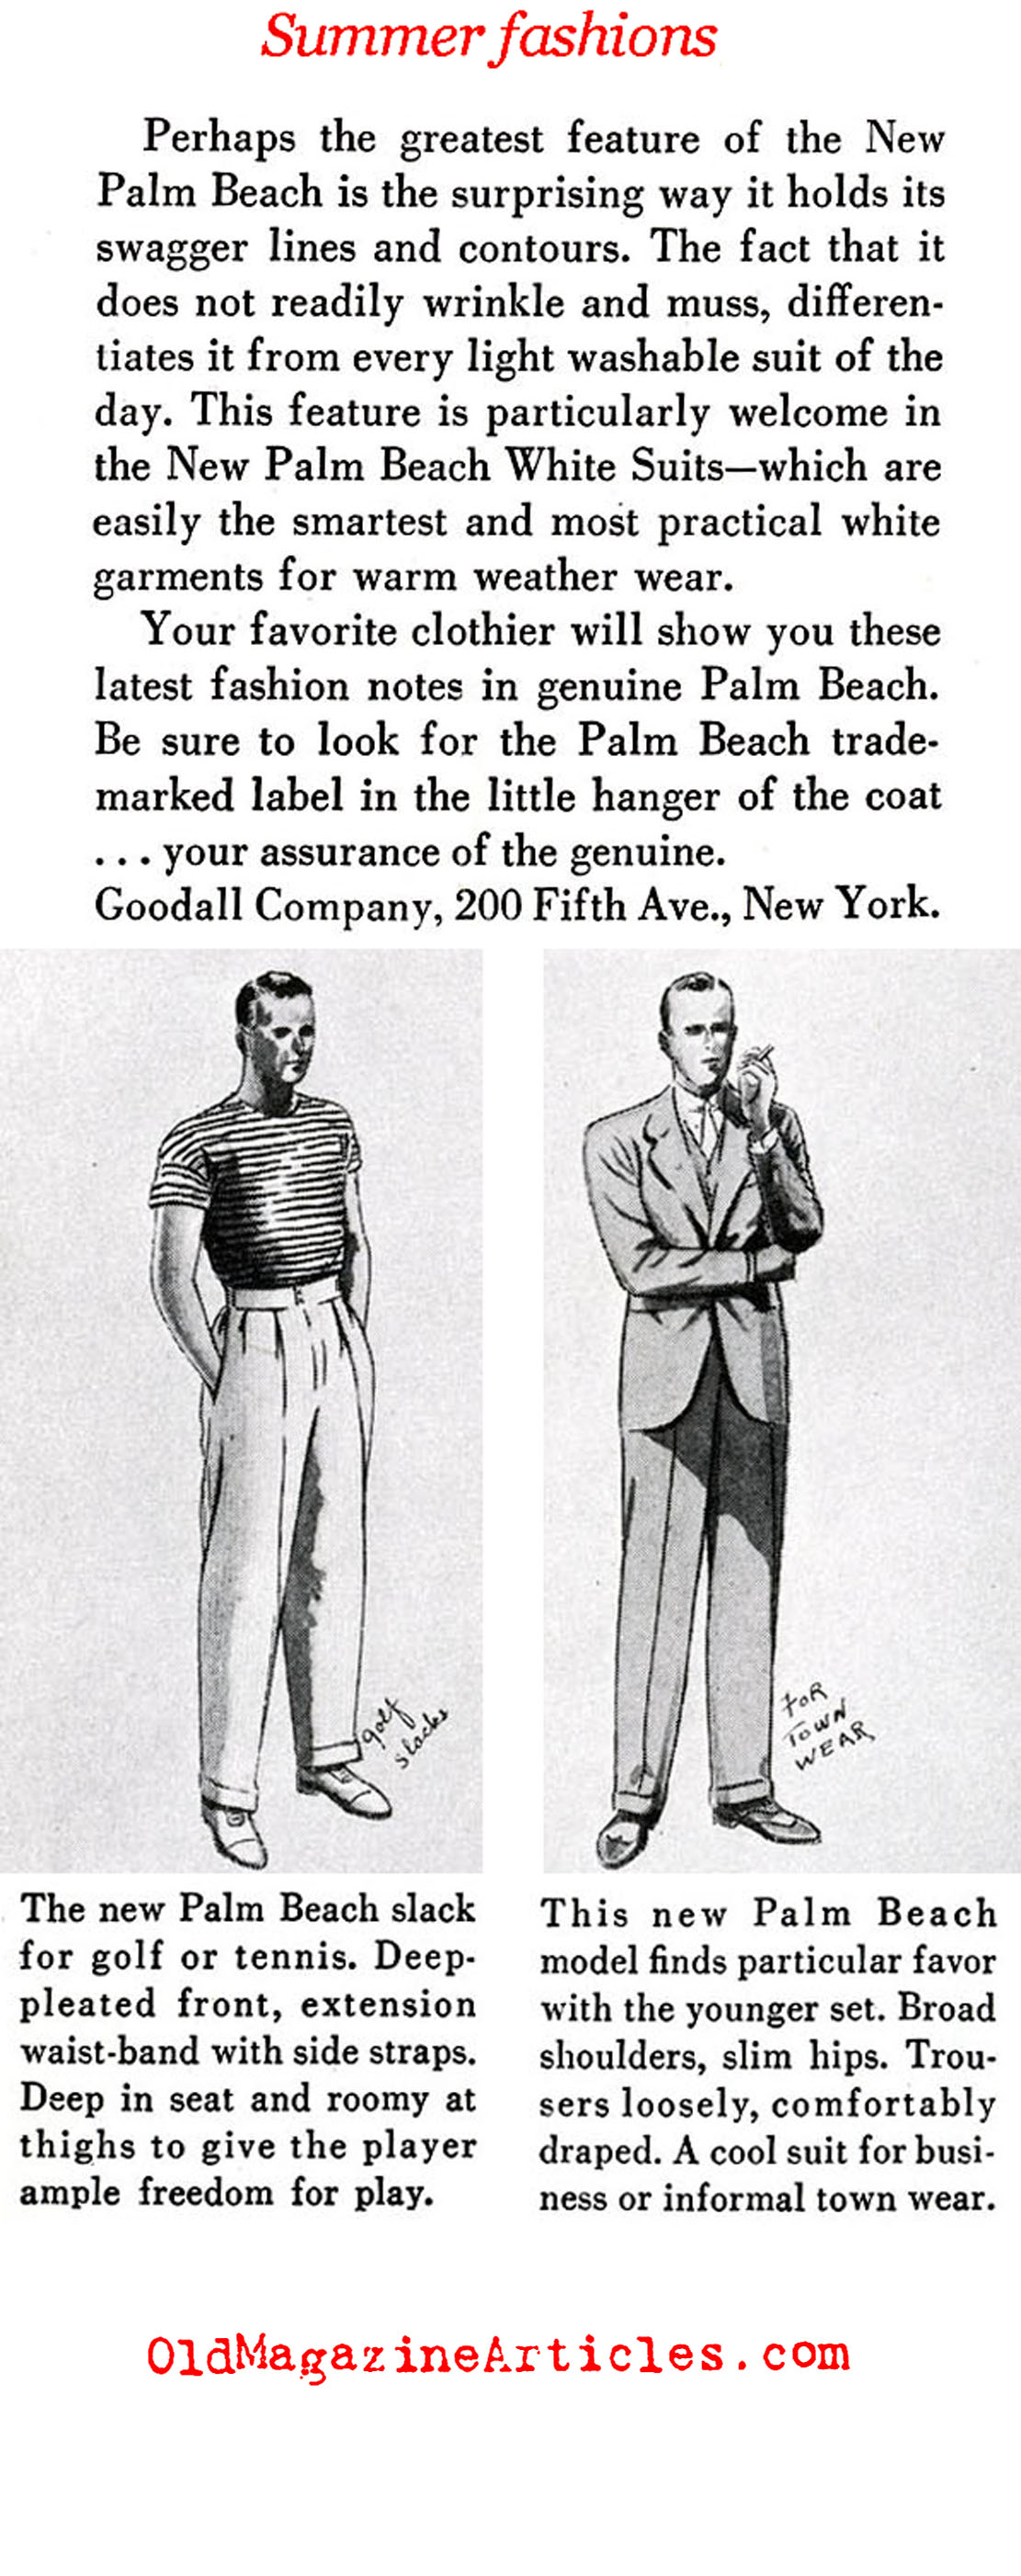 Men's Fashions for the Summer of 1932 (Magazine Advertisement)